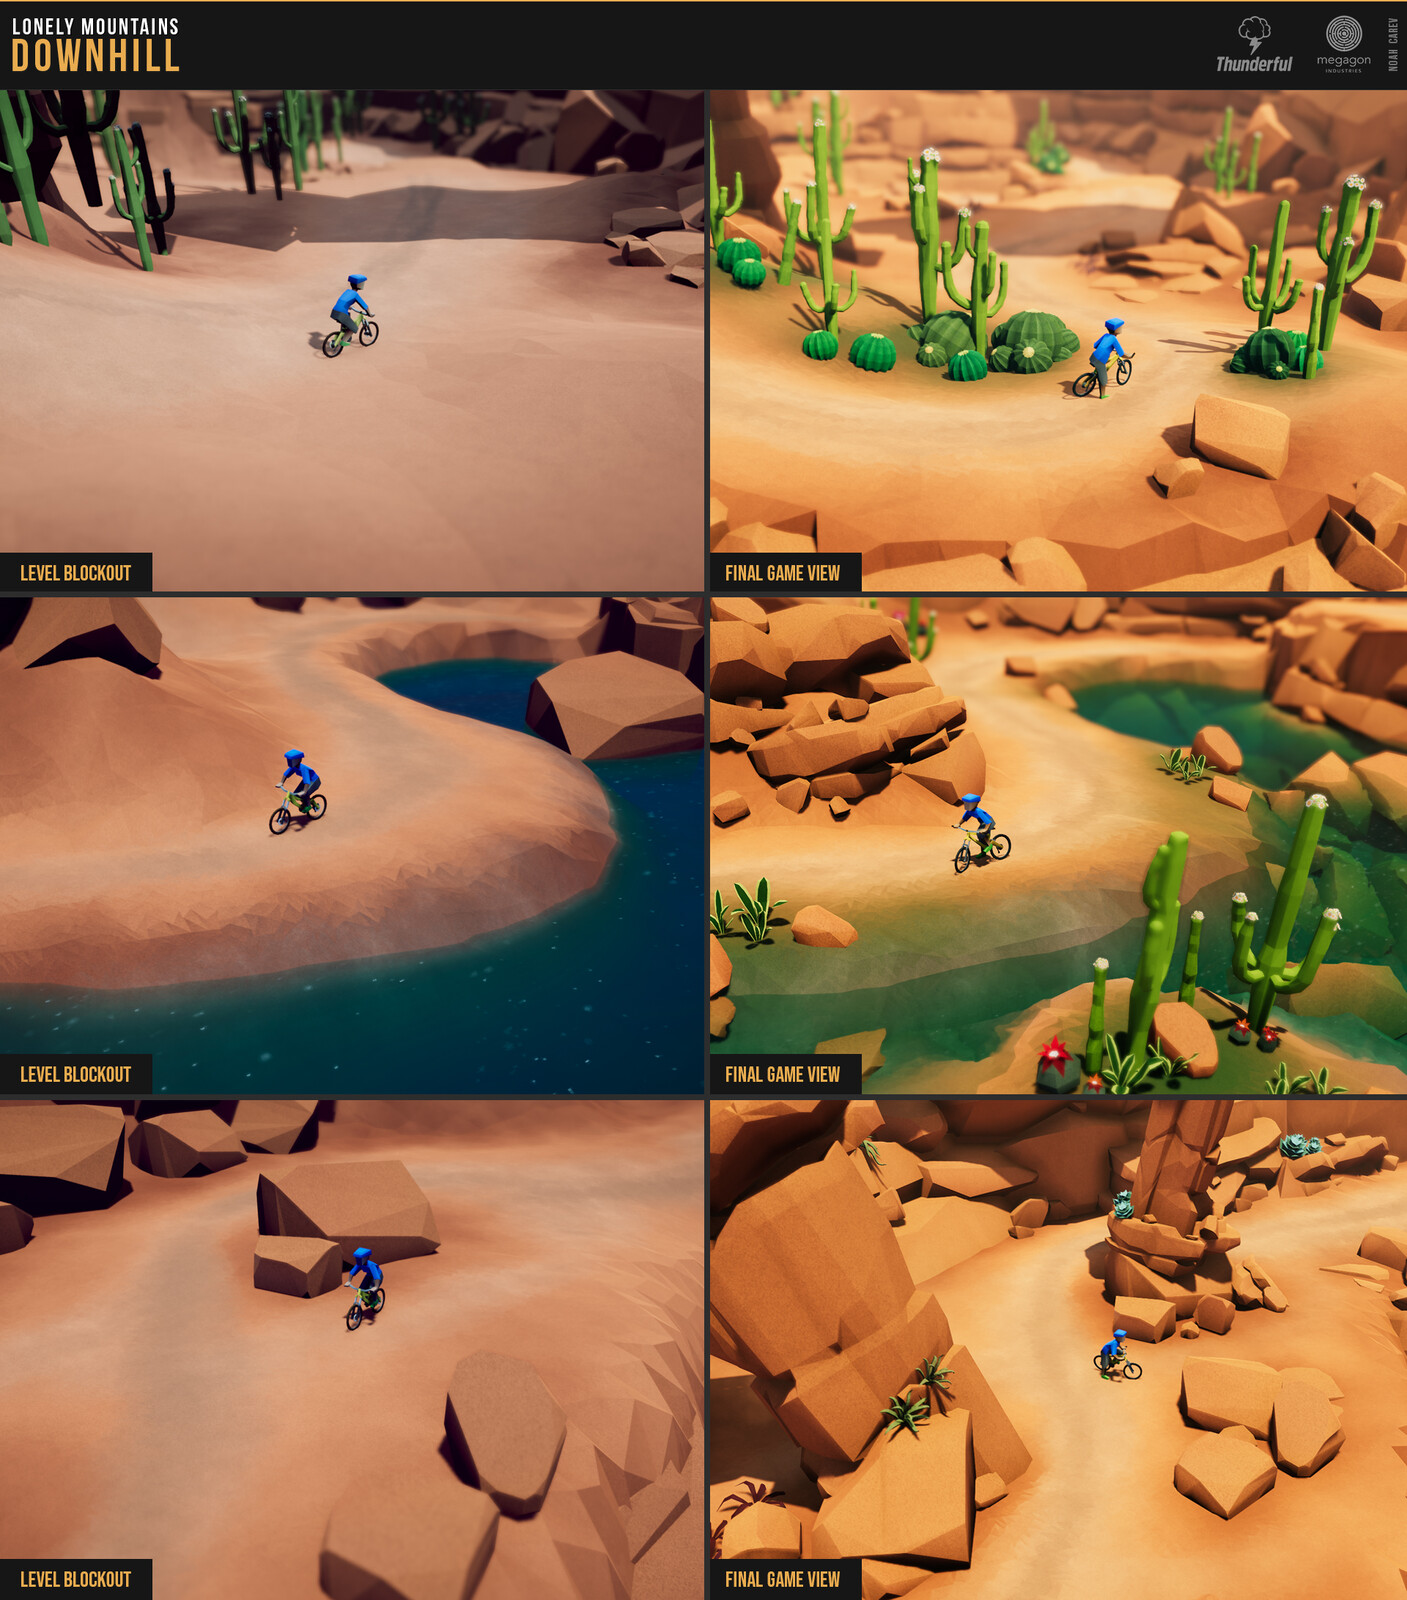 On the left side the rough level design, on the right side the finished trail ingame.